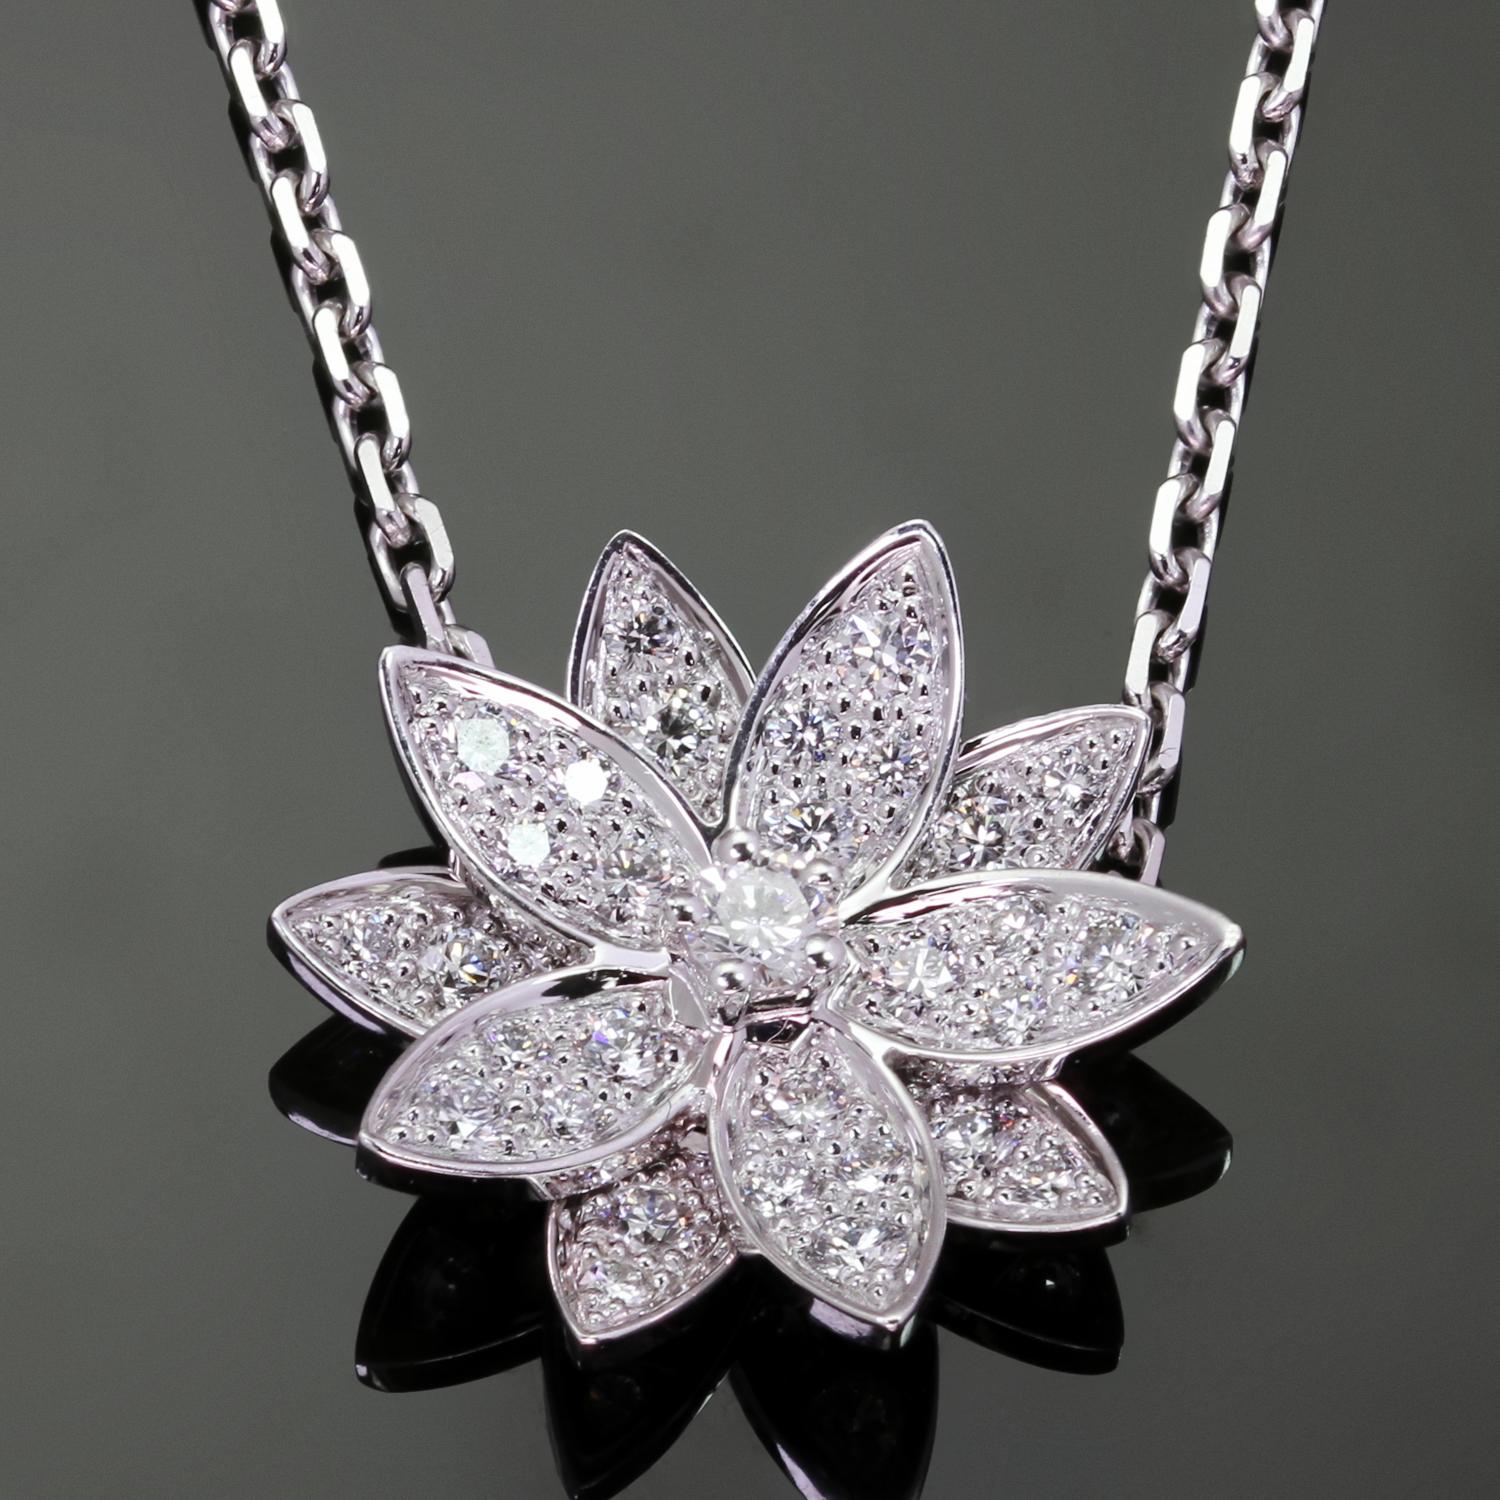 This gorgeous authentic Van Cleef & Arpels necklace features a lotus flower crafted in 18k white gold and set with 31 round brilliant D-E-F VVS1-VVS2 diamonds weighing an estimated 0.46 carats. The pendant is attached to the chain. Made in France